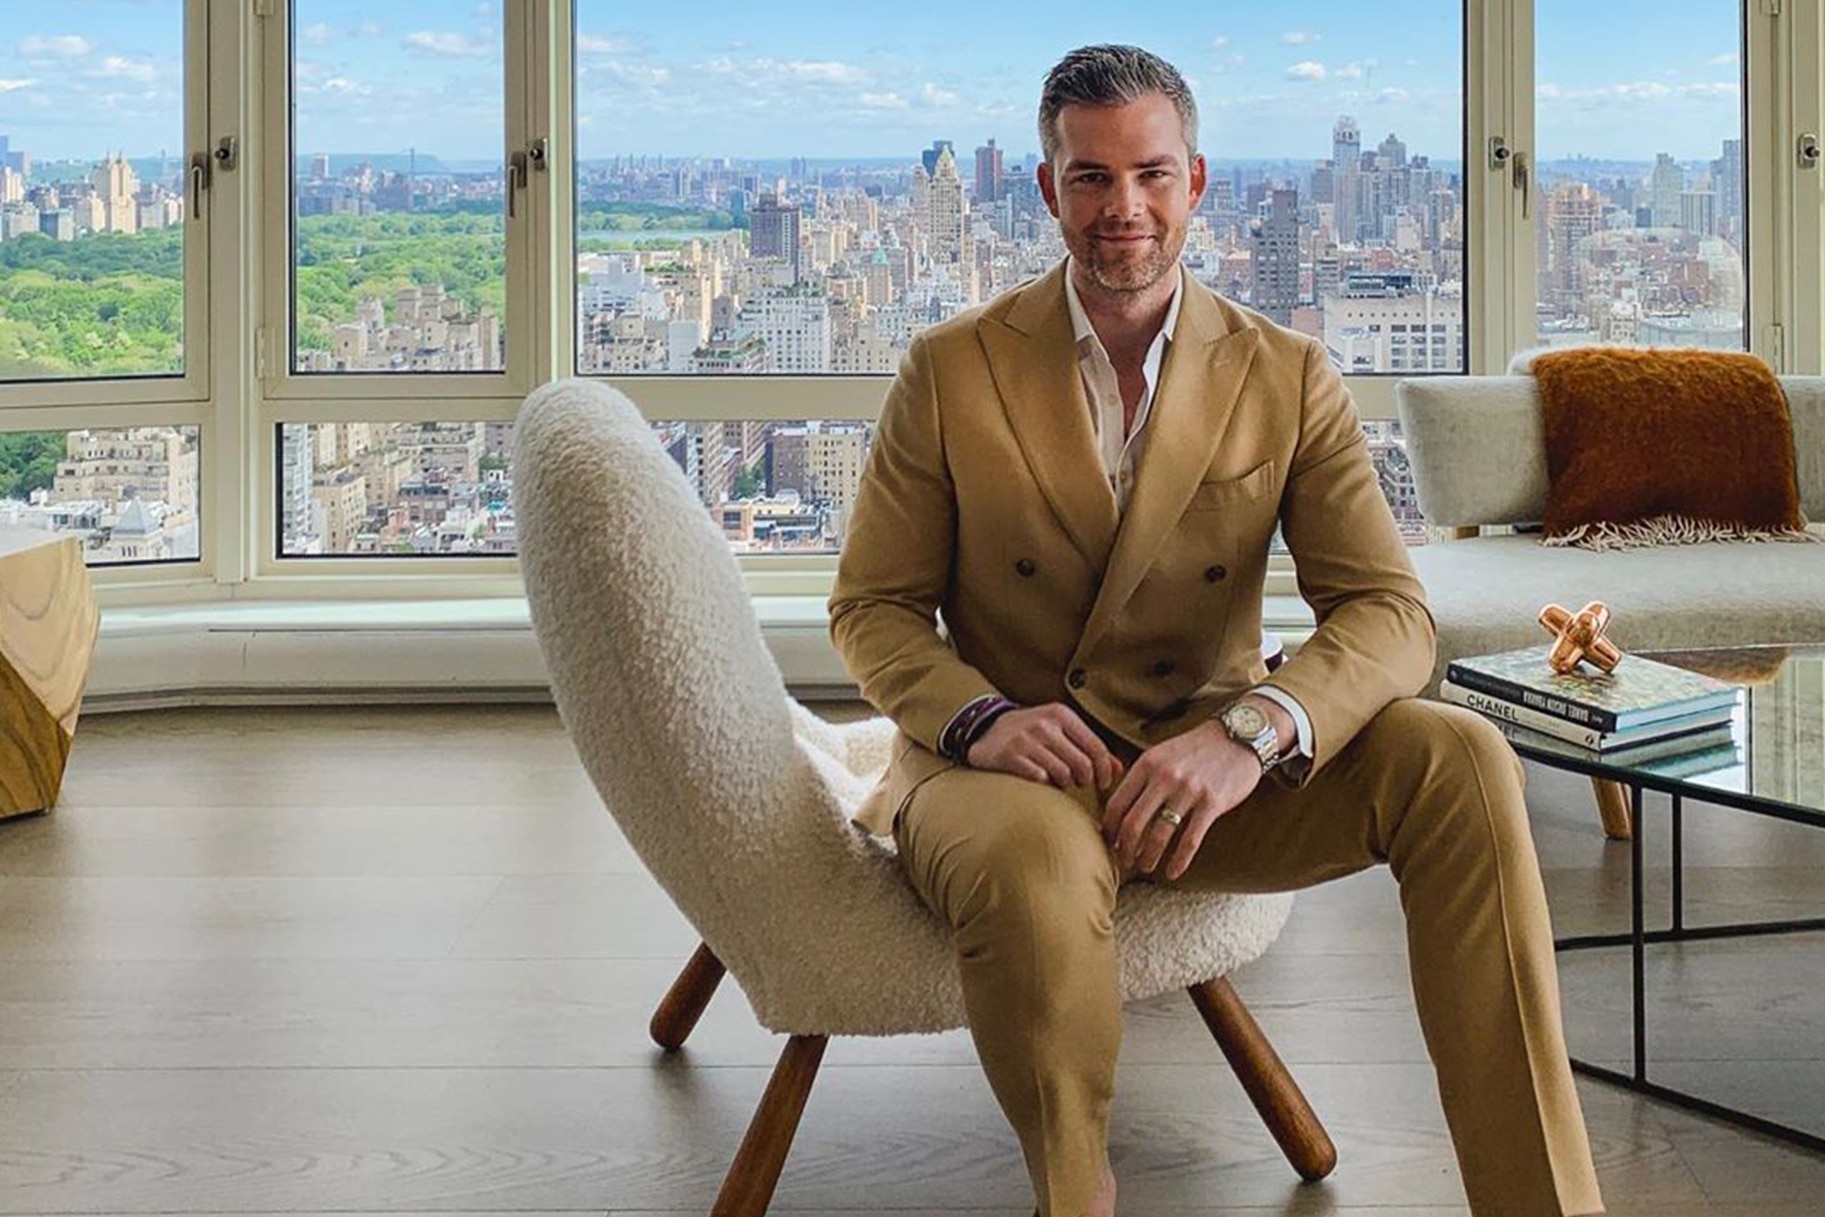 Marc Jacobs' 'Million Dollar Listing' debut features golden ceilings